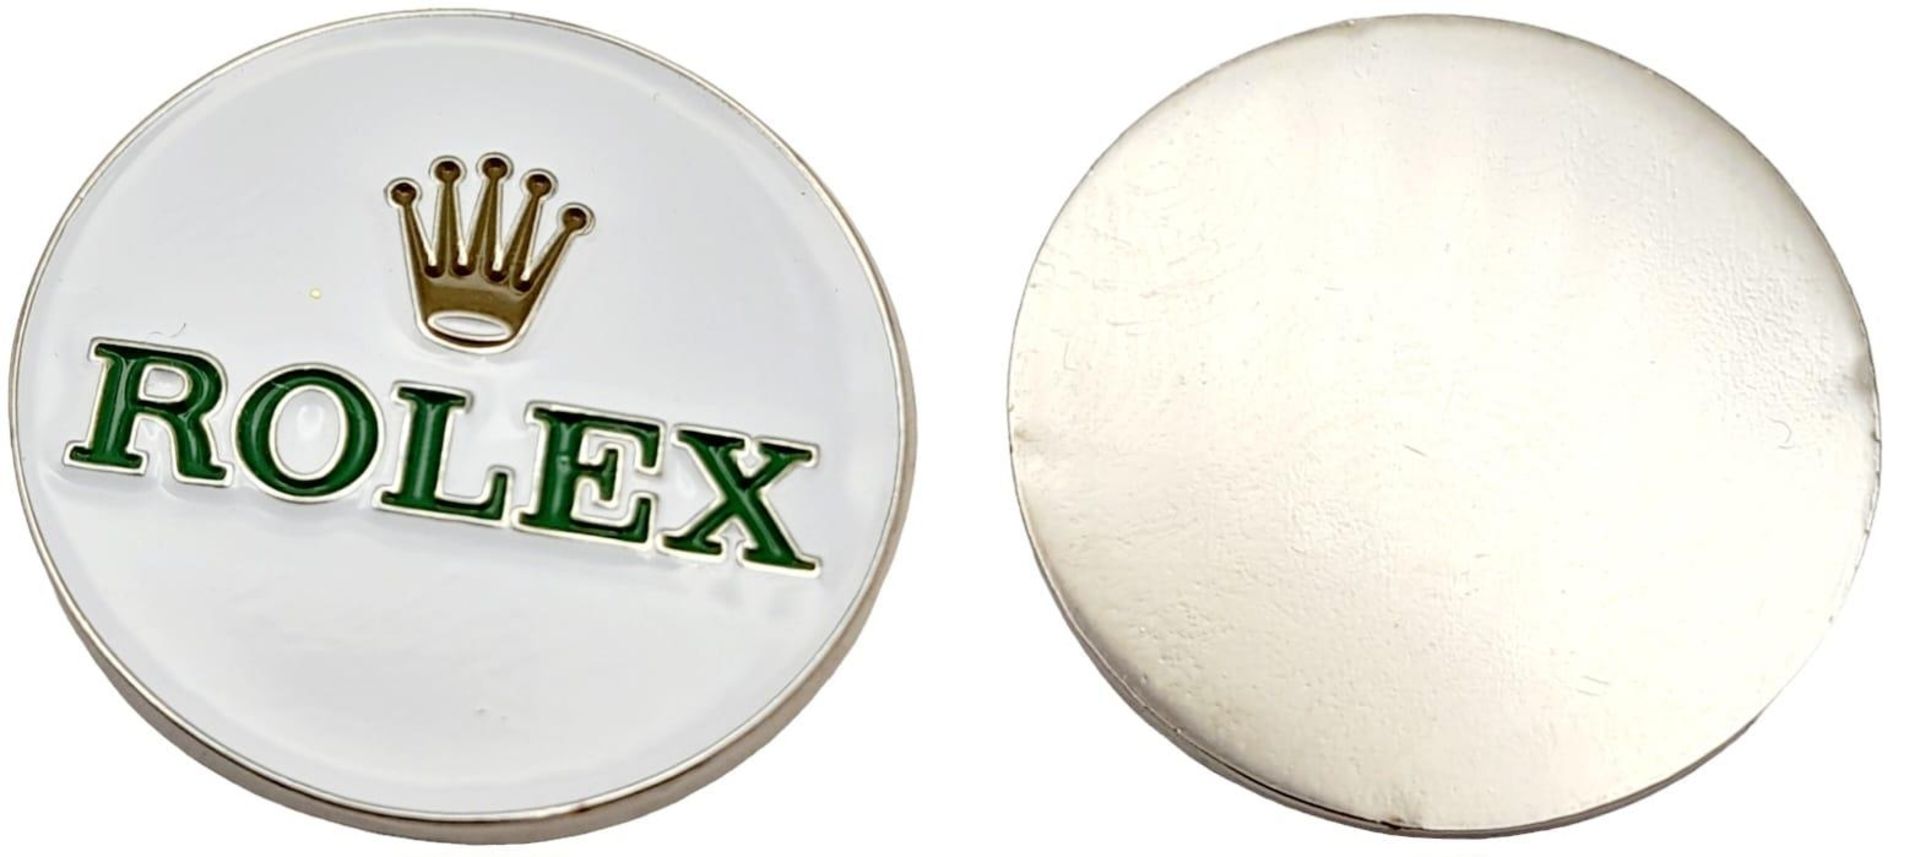 A Rolex Branded Golf Putting Green Divot Repair Tool with Removable Rolex Branded Ball Markers. - Image 4 of 5